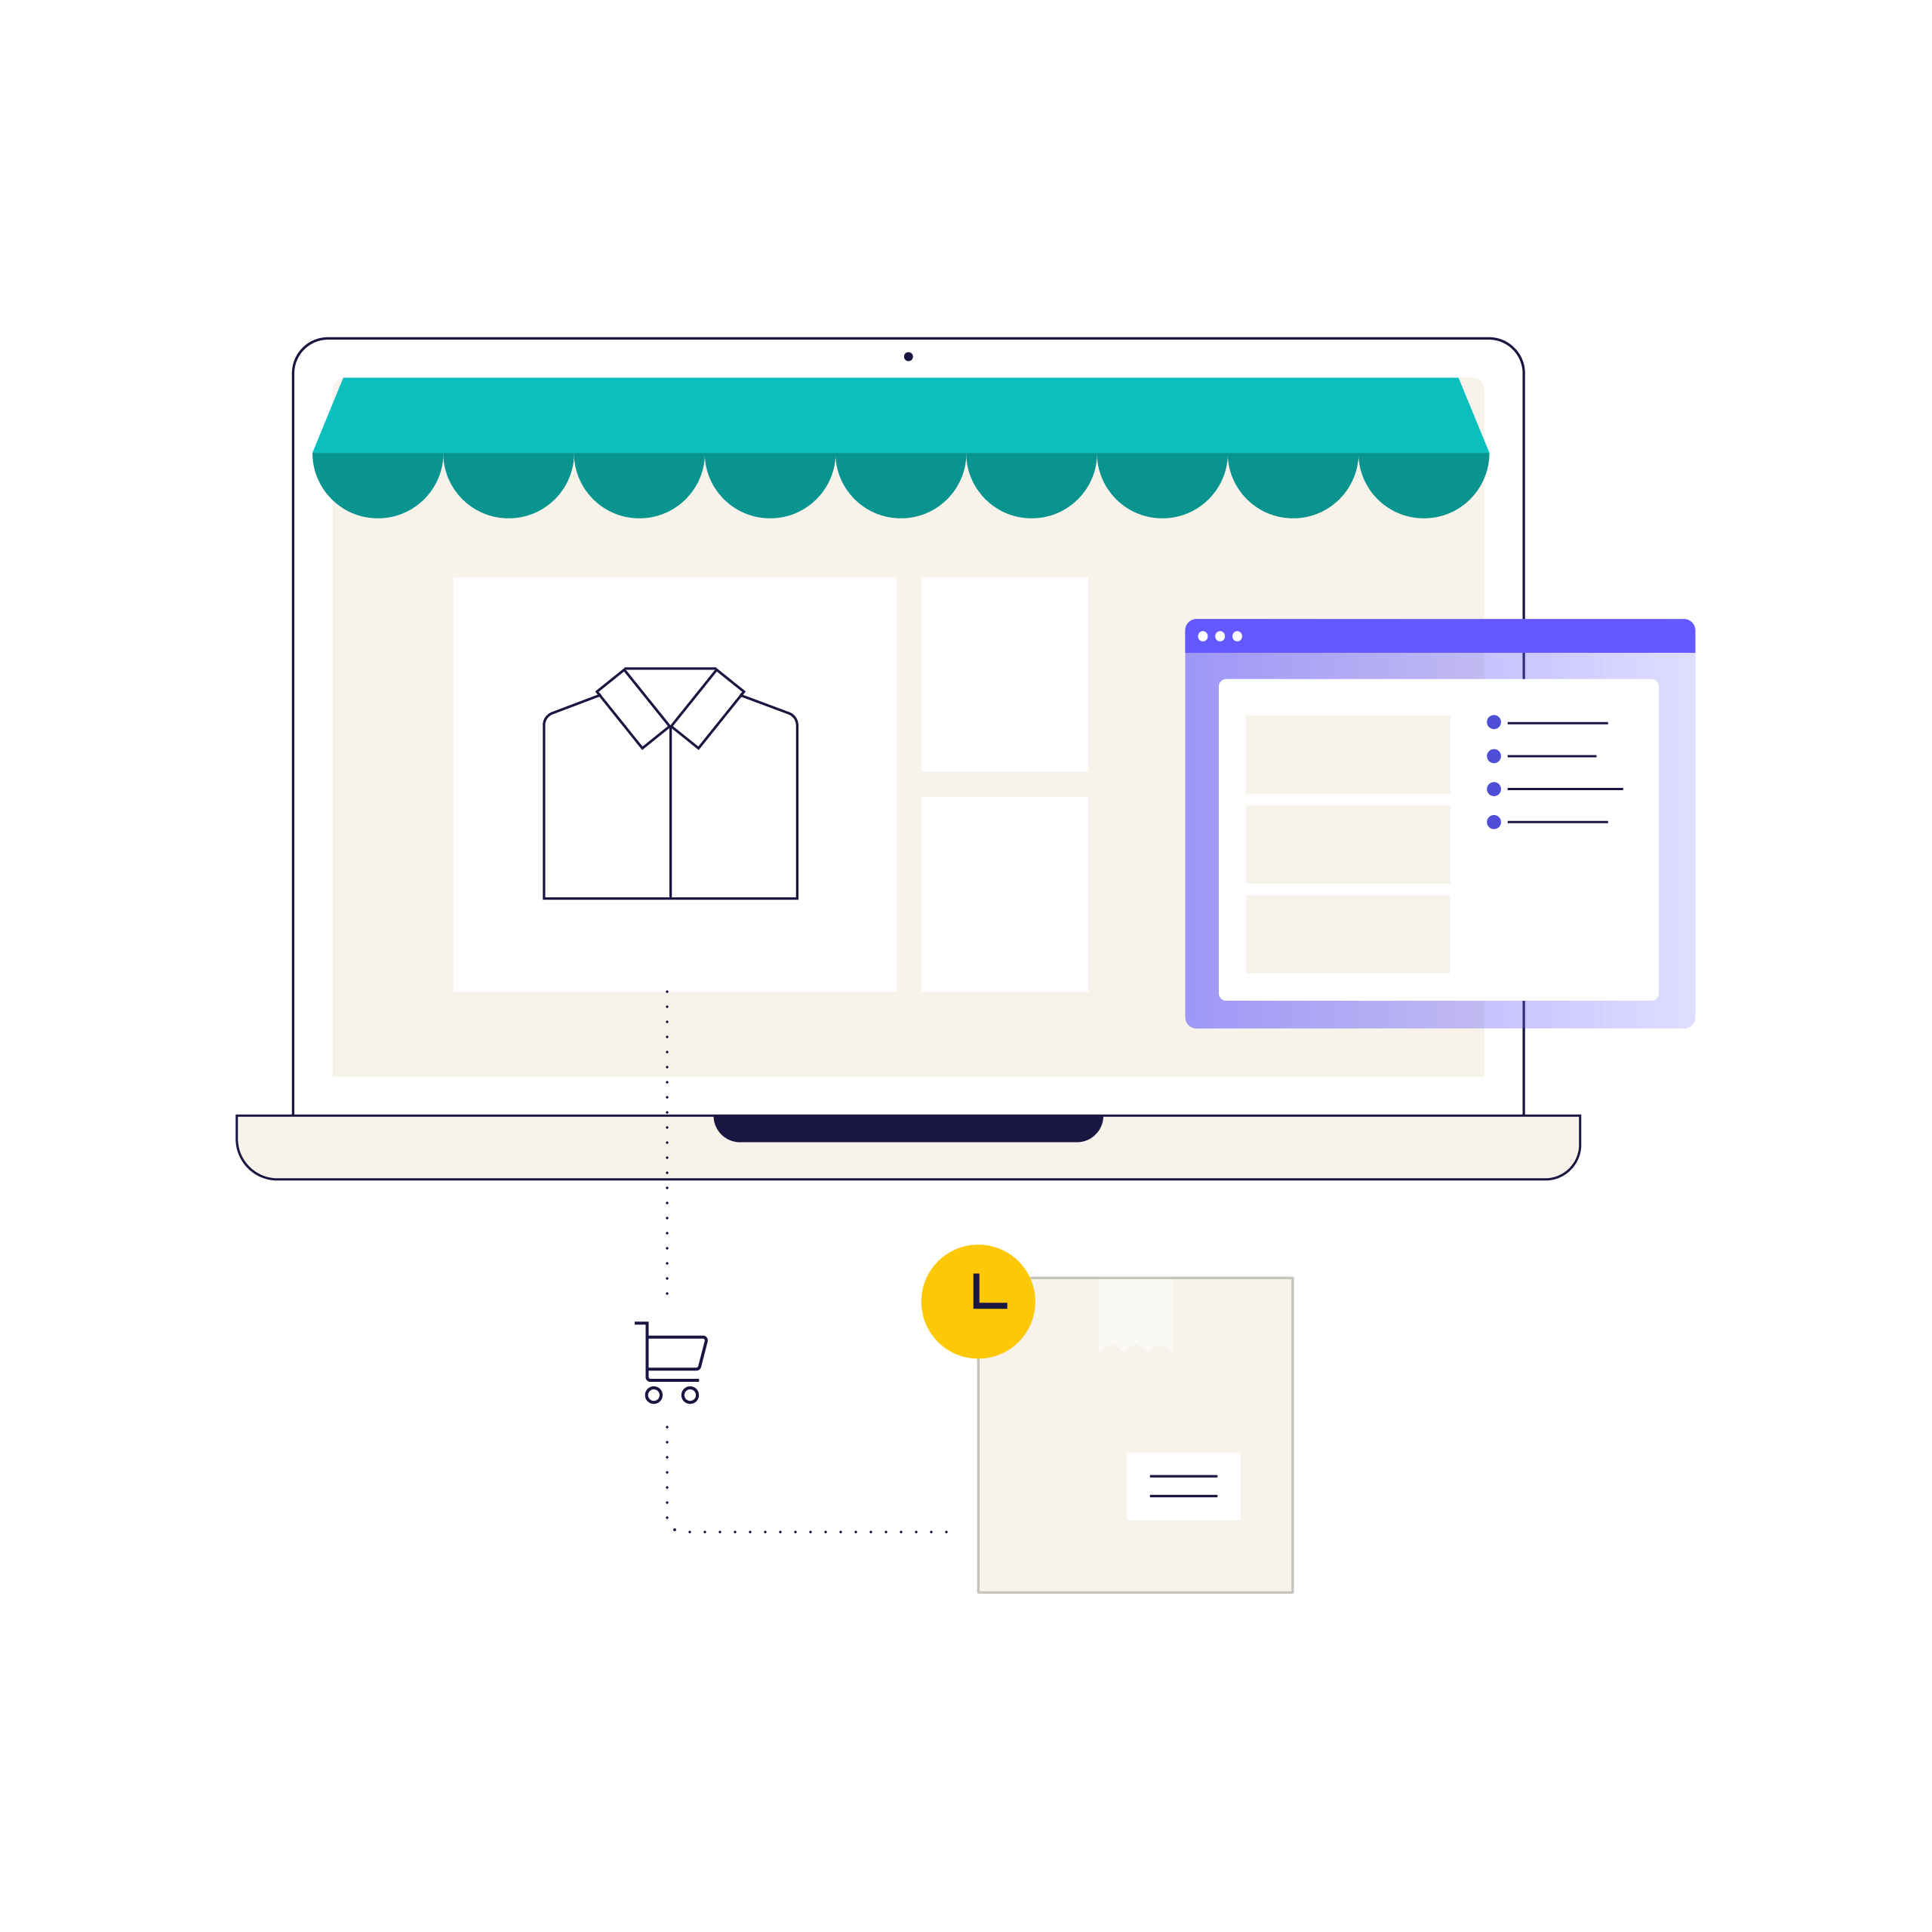 Unified Commerce